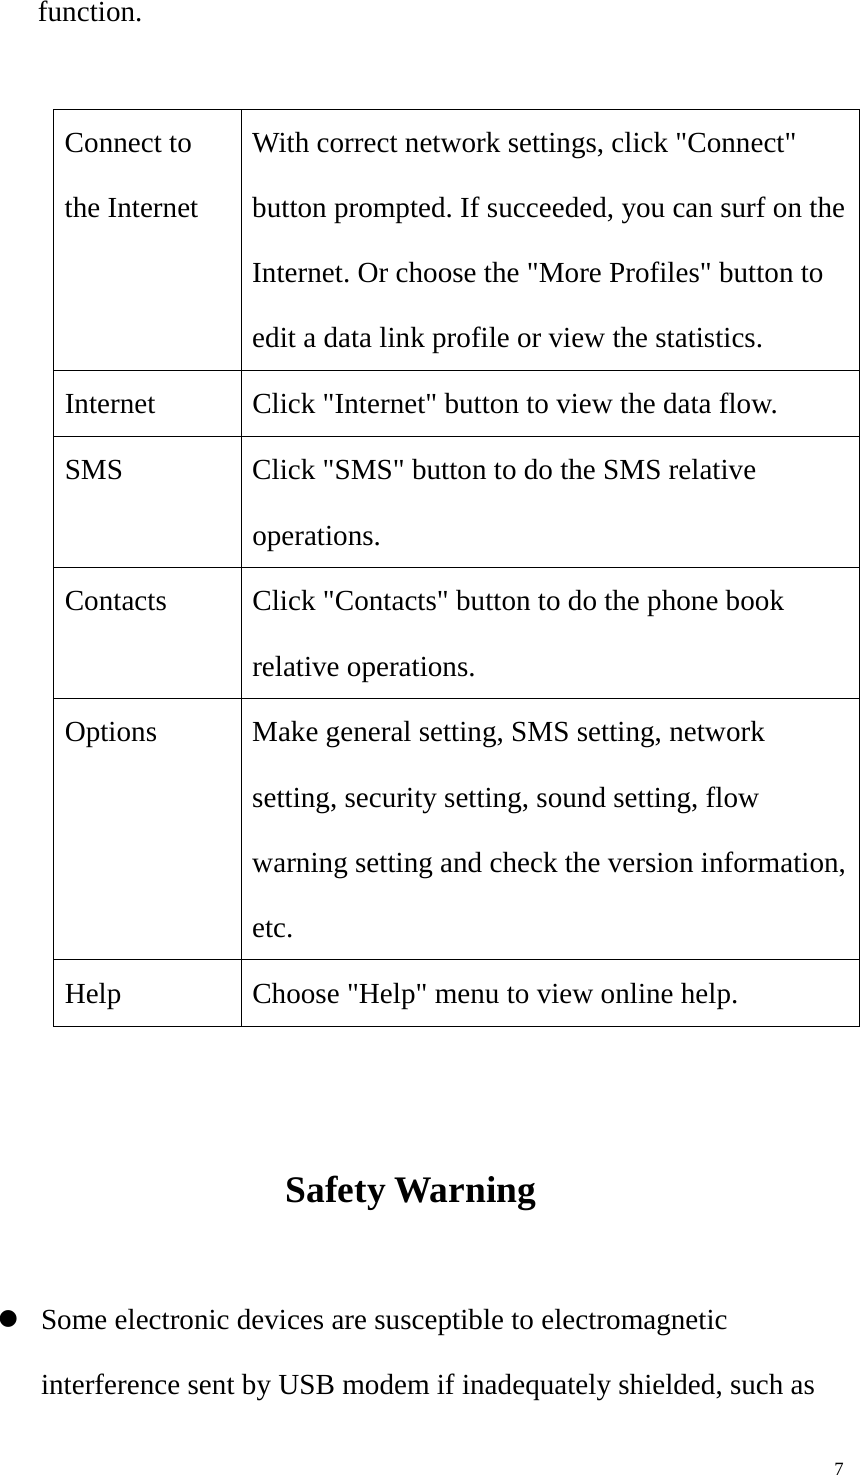   7function.  Connect to the Internet With correct network settings, click &quot;Connect&quot; button prompted. If succeeded, you can surf on the Internet. Or choose the &quot;More Profiles&quot; button to edit a data link profile or view the statistics.   Internet  Click &quot;Internet&quot; button to view the data flow. SMS  Click &quot;SMS&quot; button to do the SMS relative operations. Contacts  Click &quot;Contacts&quot; button to do the phone book relative operations. Options  Make general setting, SMS setting, network setting, security setting, sound setting, flow warning setting and check the version information, etc. Help  Choose &quot;Help&quot; menu to view online help.   Safety Warning  z Some electronic devices are susceptible to electromagnetic interference sent by USB modem if inadequately shielded, such as 